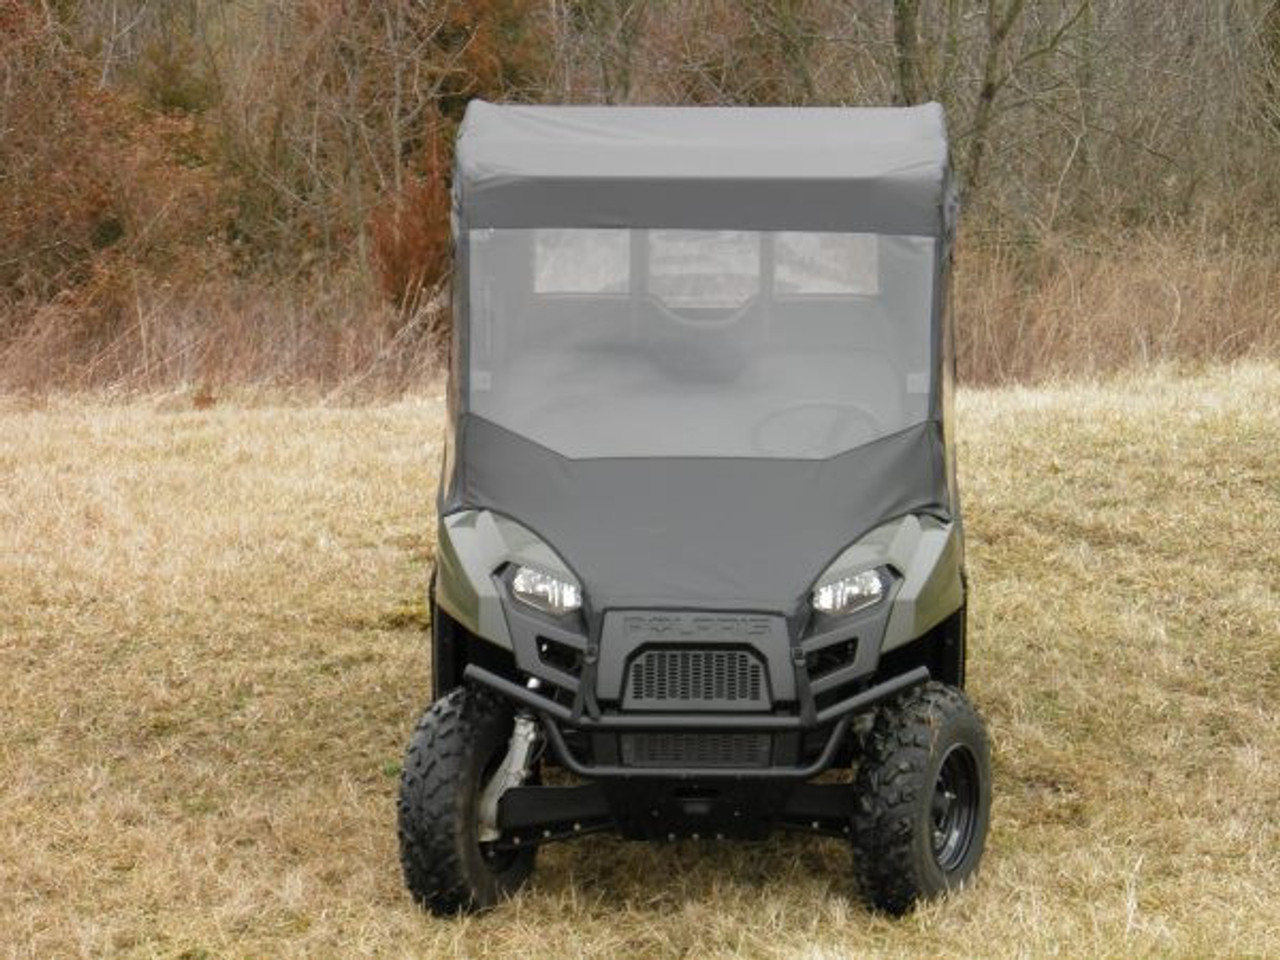 3 Star side x side Polaris Ranger Crew 570-4 vinyl windshield and top front view